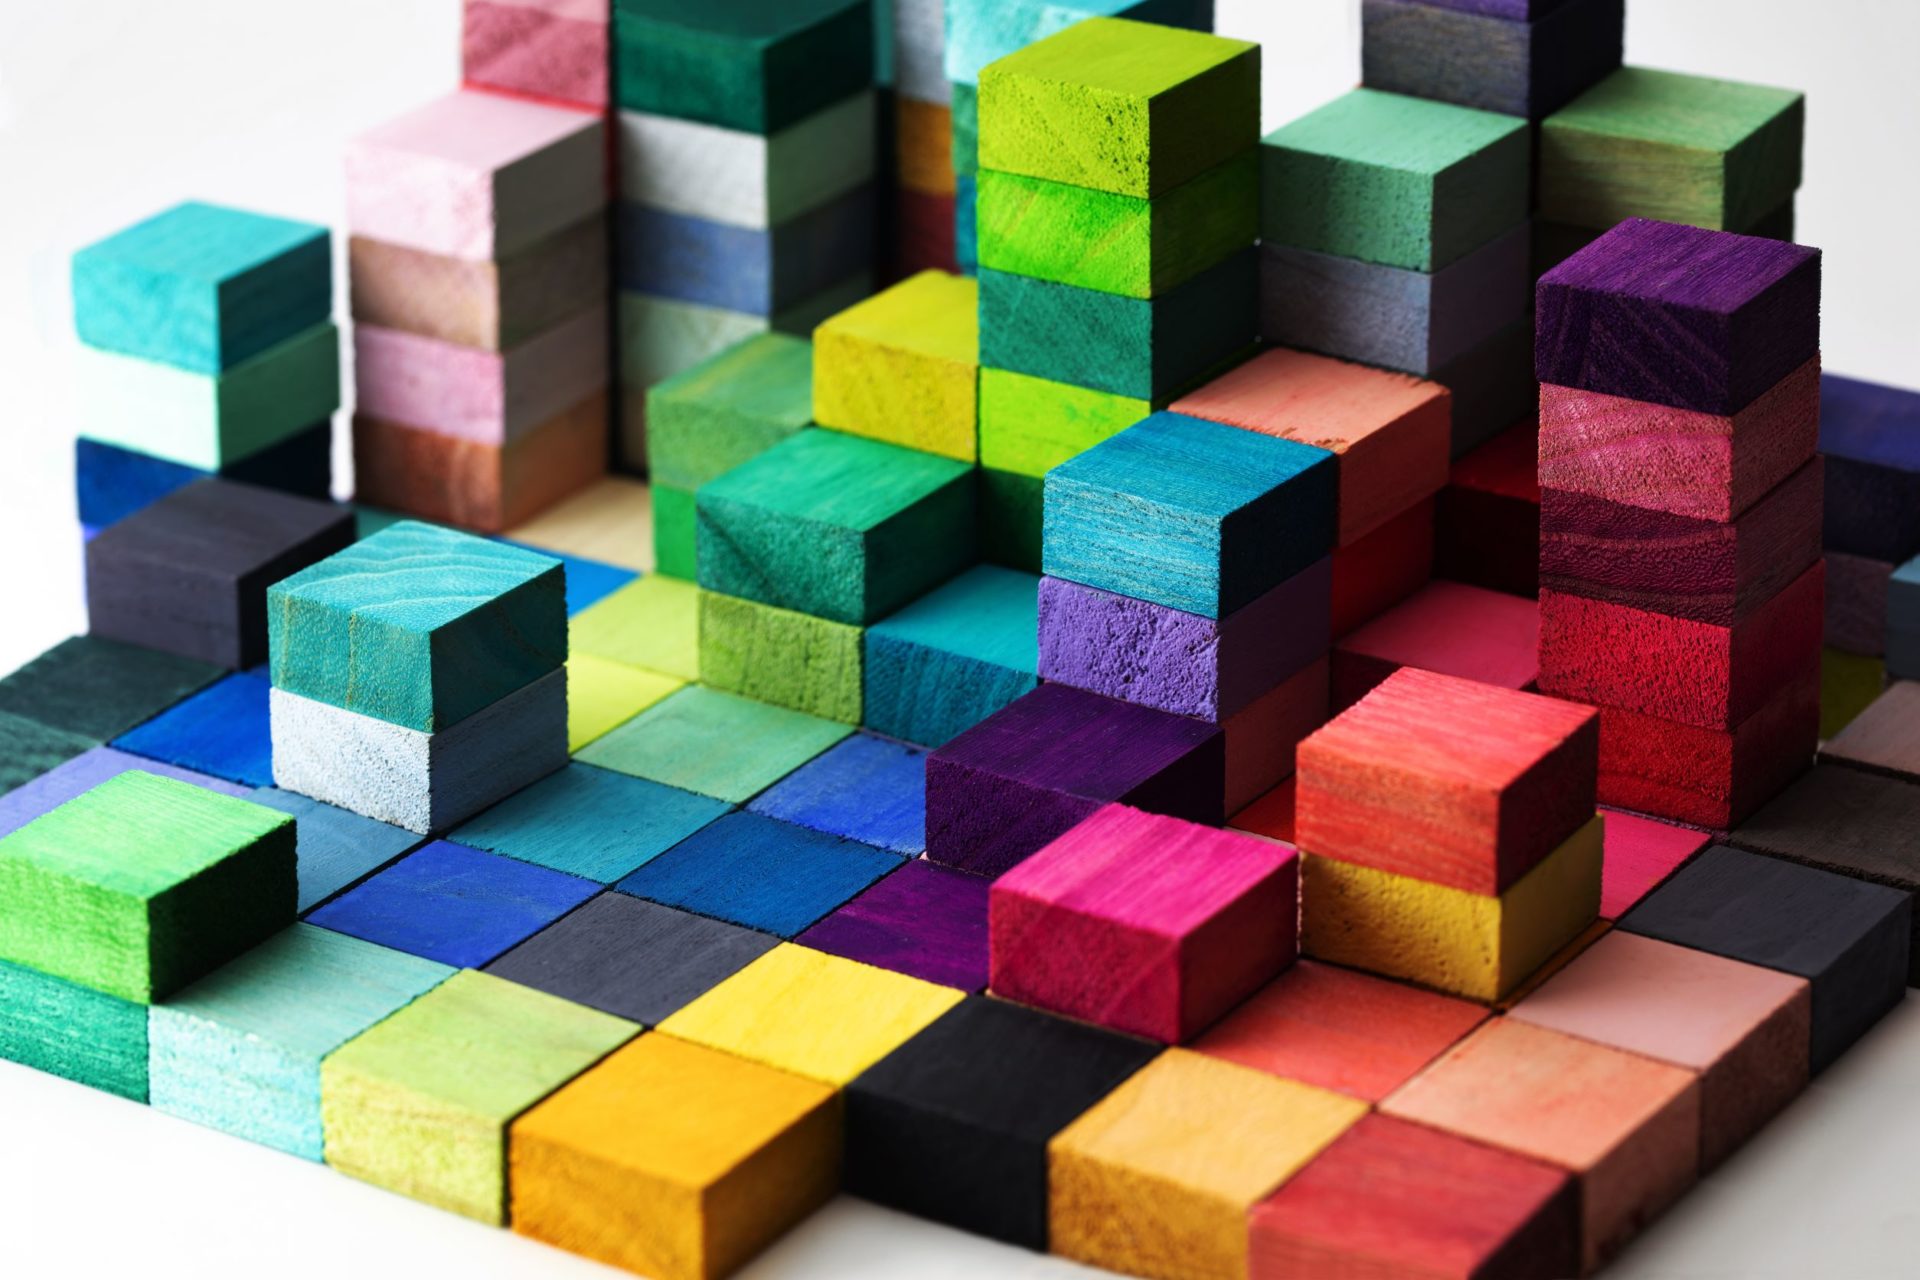 Blocks of all Colors representing Diversity, Equity & Inclusion